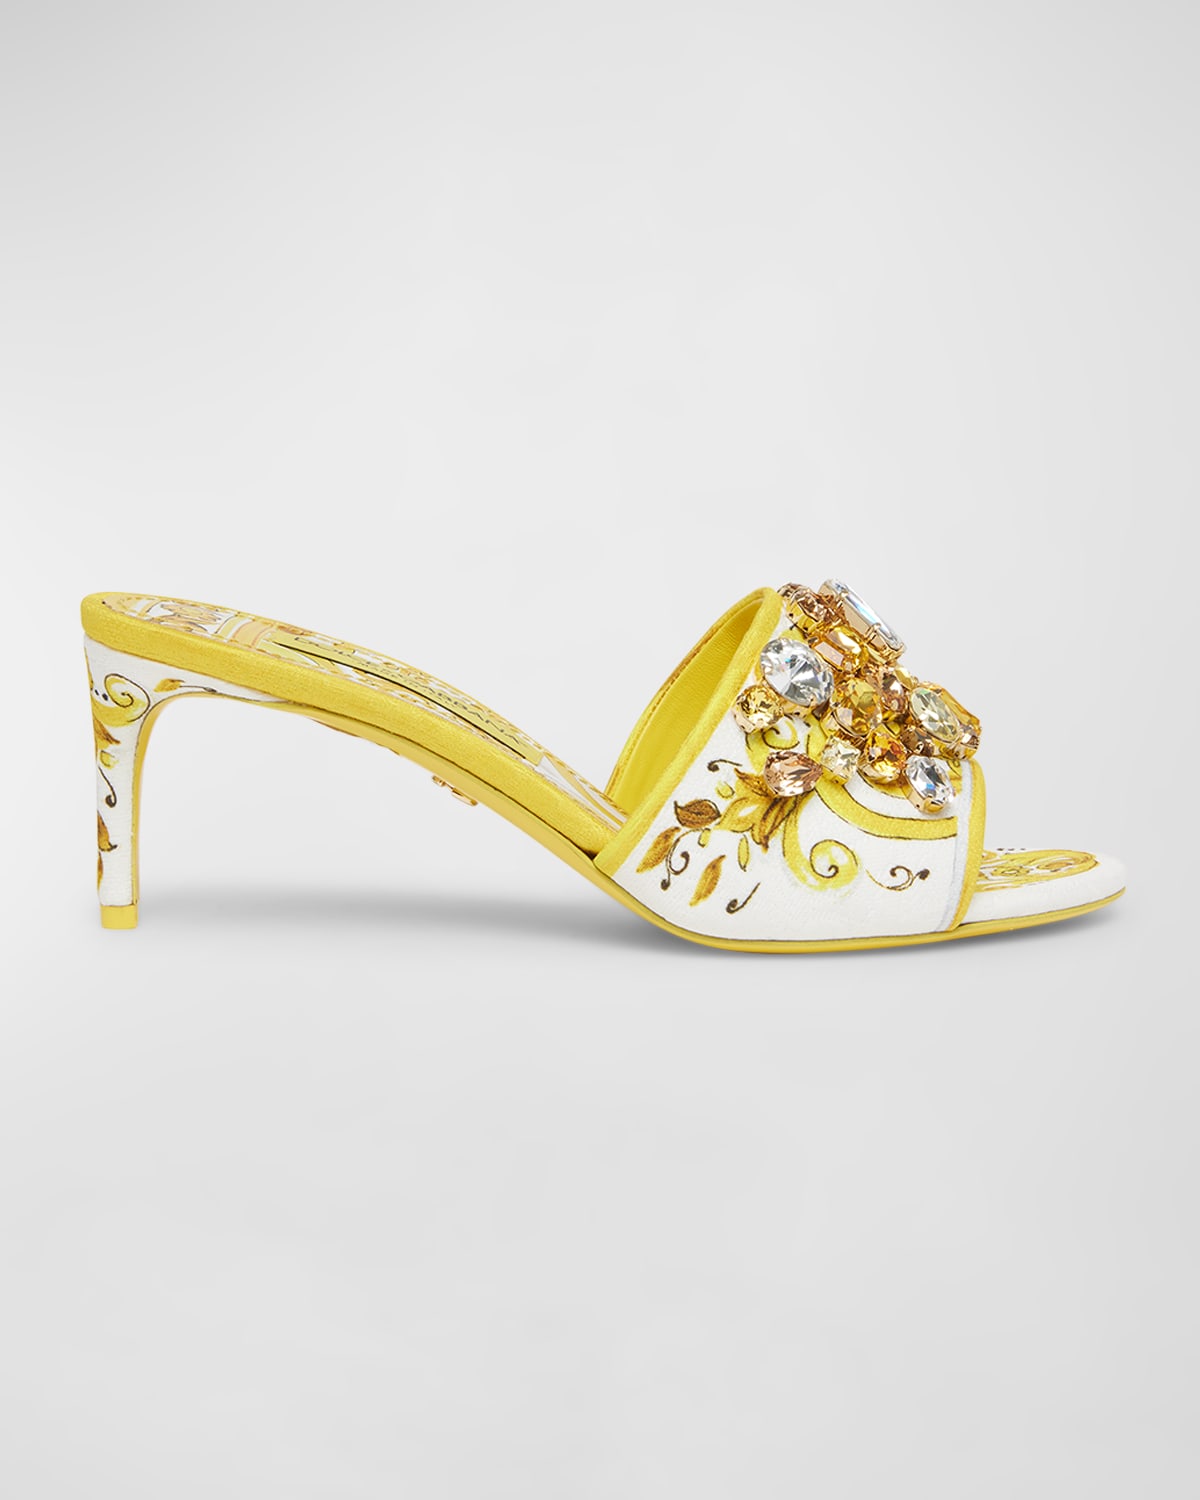 Dolce & Gabbana Keira Printed Crystal Mule Sandals In Yellow